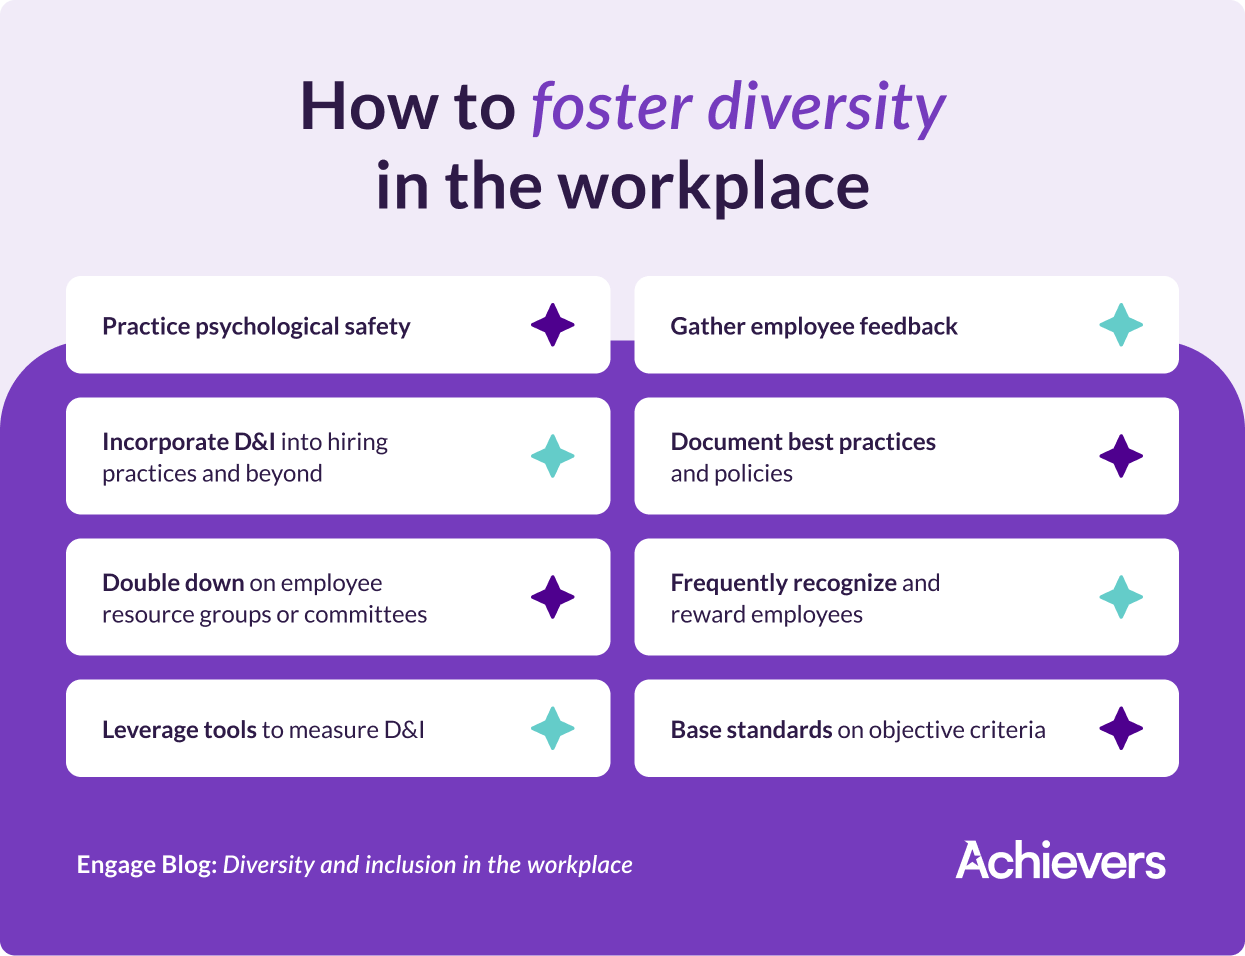 How to foster diversity and inclusion